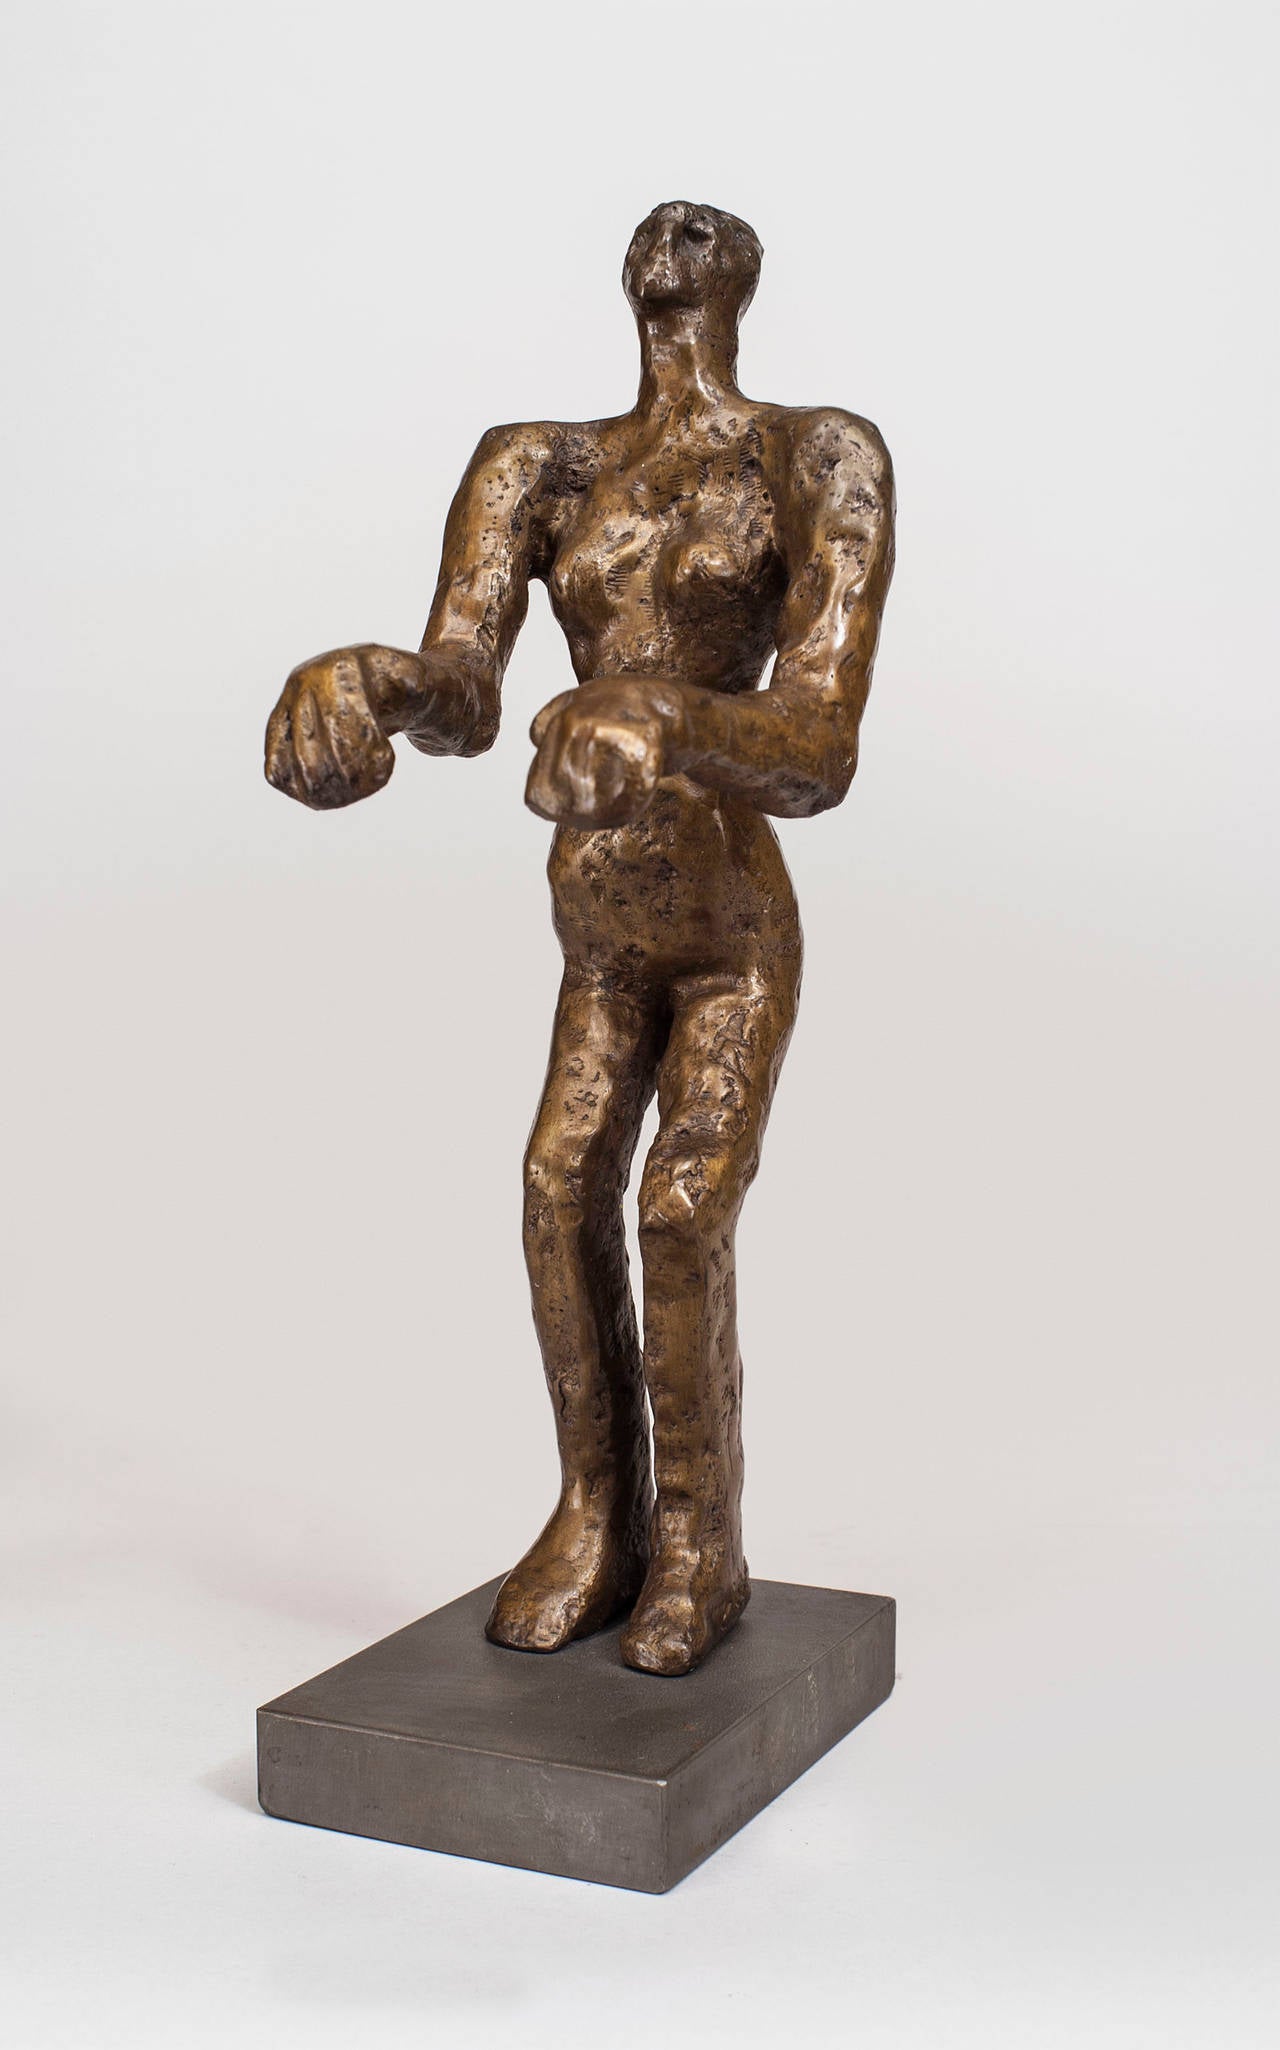 American Post-Modern Design bronze sculpture of a figure with lowered arms and bent knees on a rectangular base, (signed: CAROL BRUNS, titled 